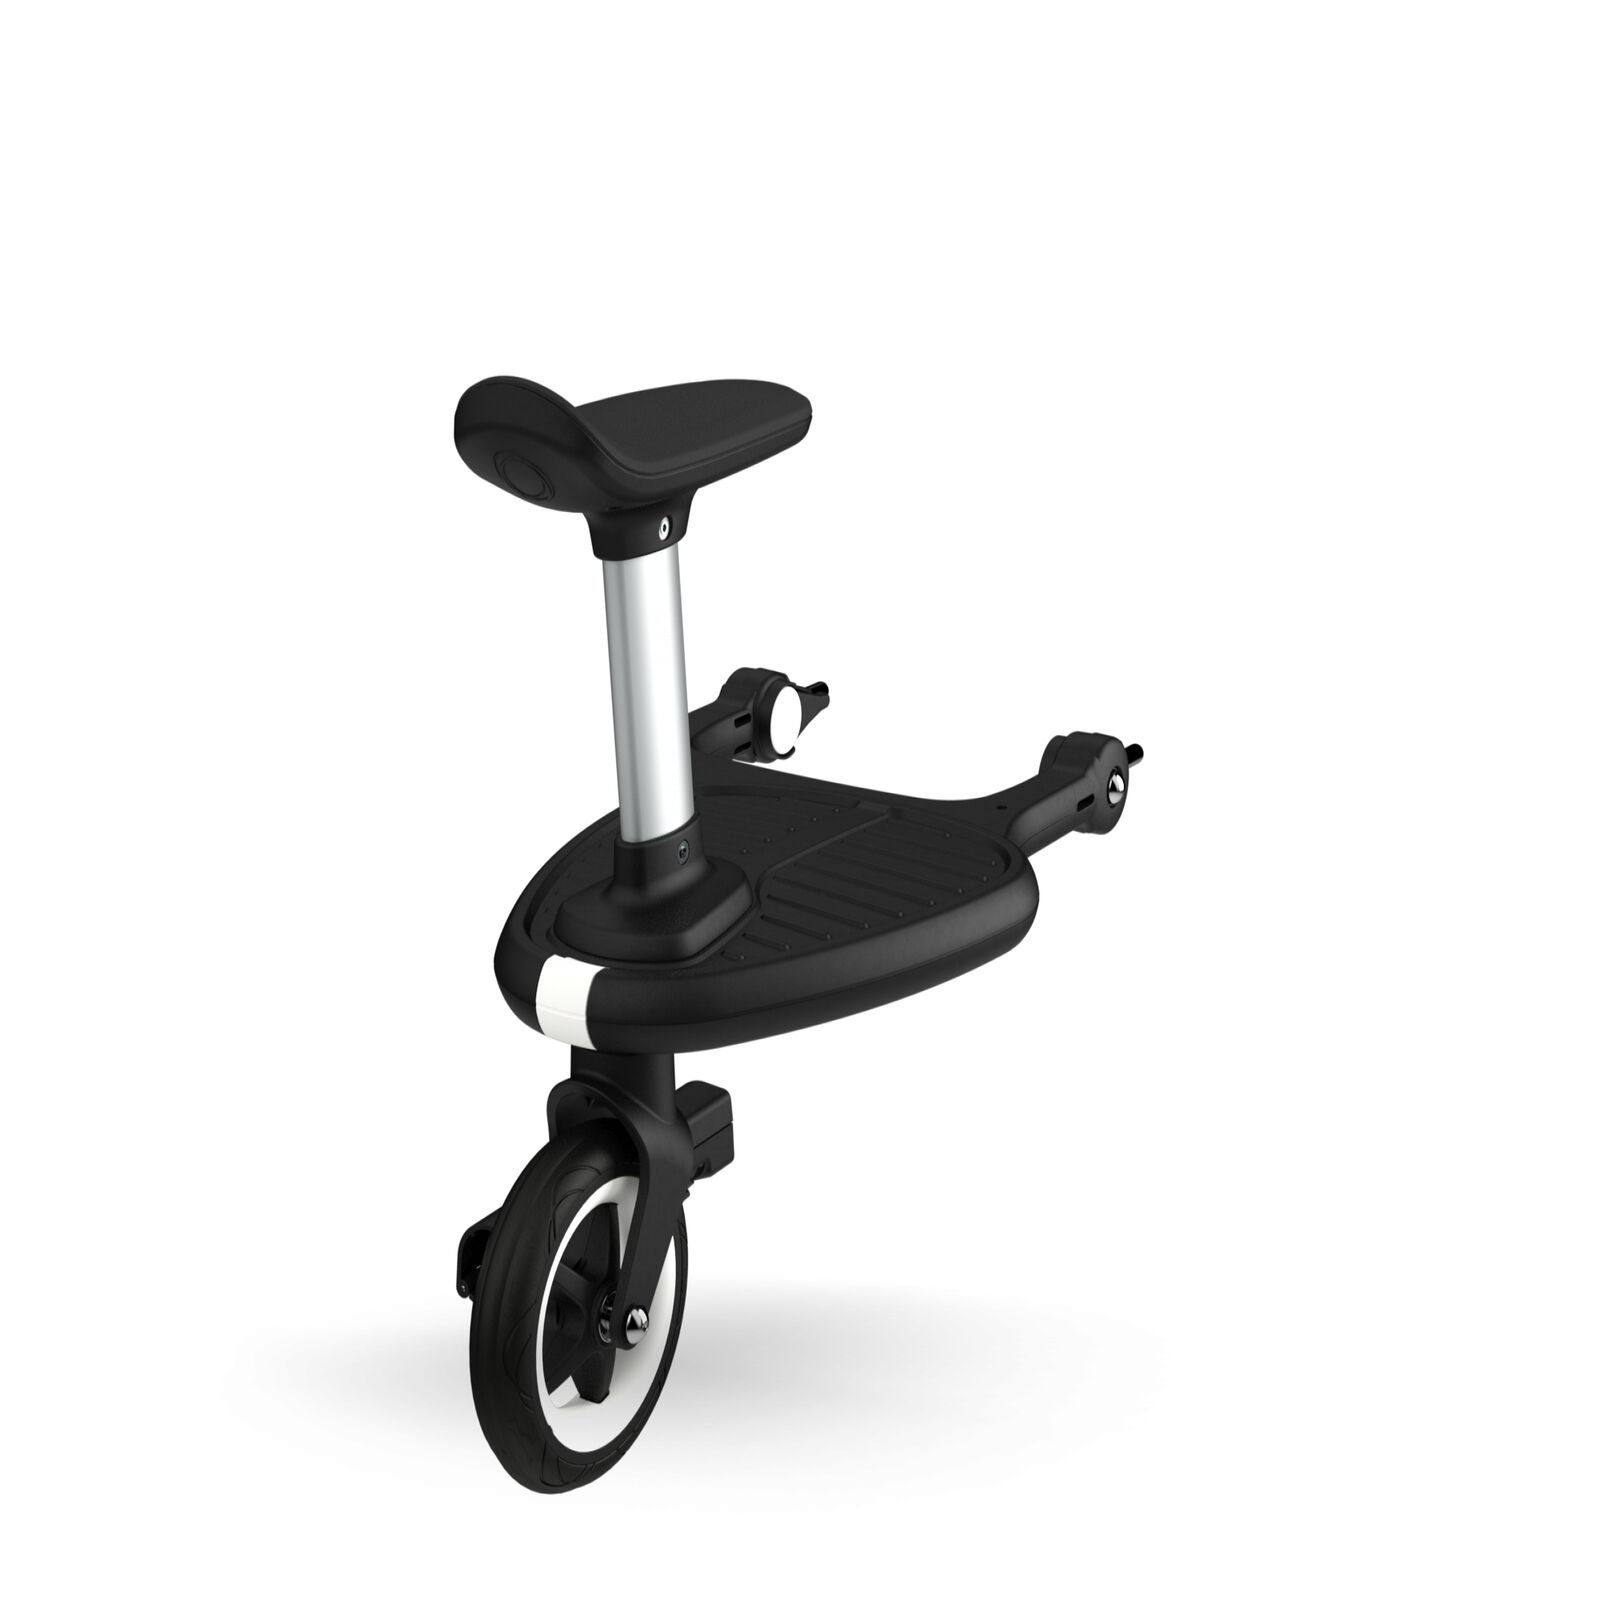 Bugaboo Cameleon 3 adapter for Bugaboo comfort wheeled board - View 6